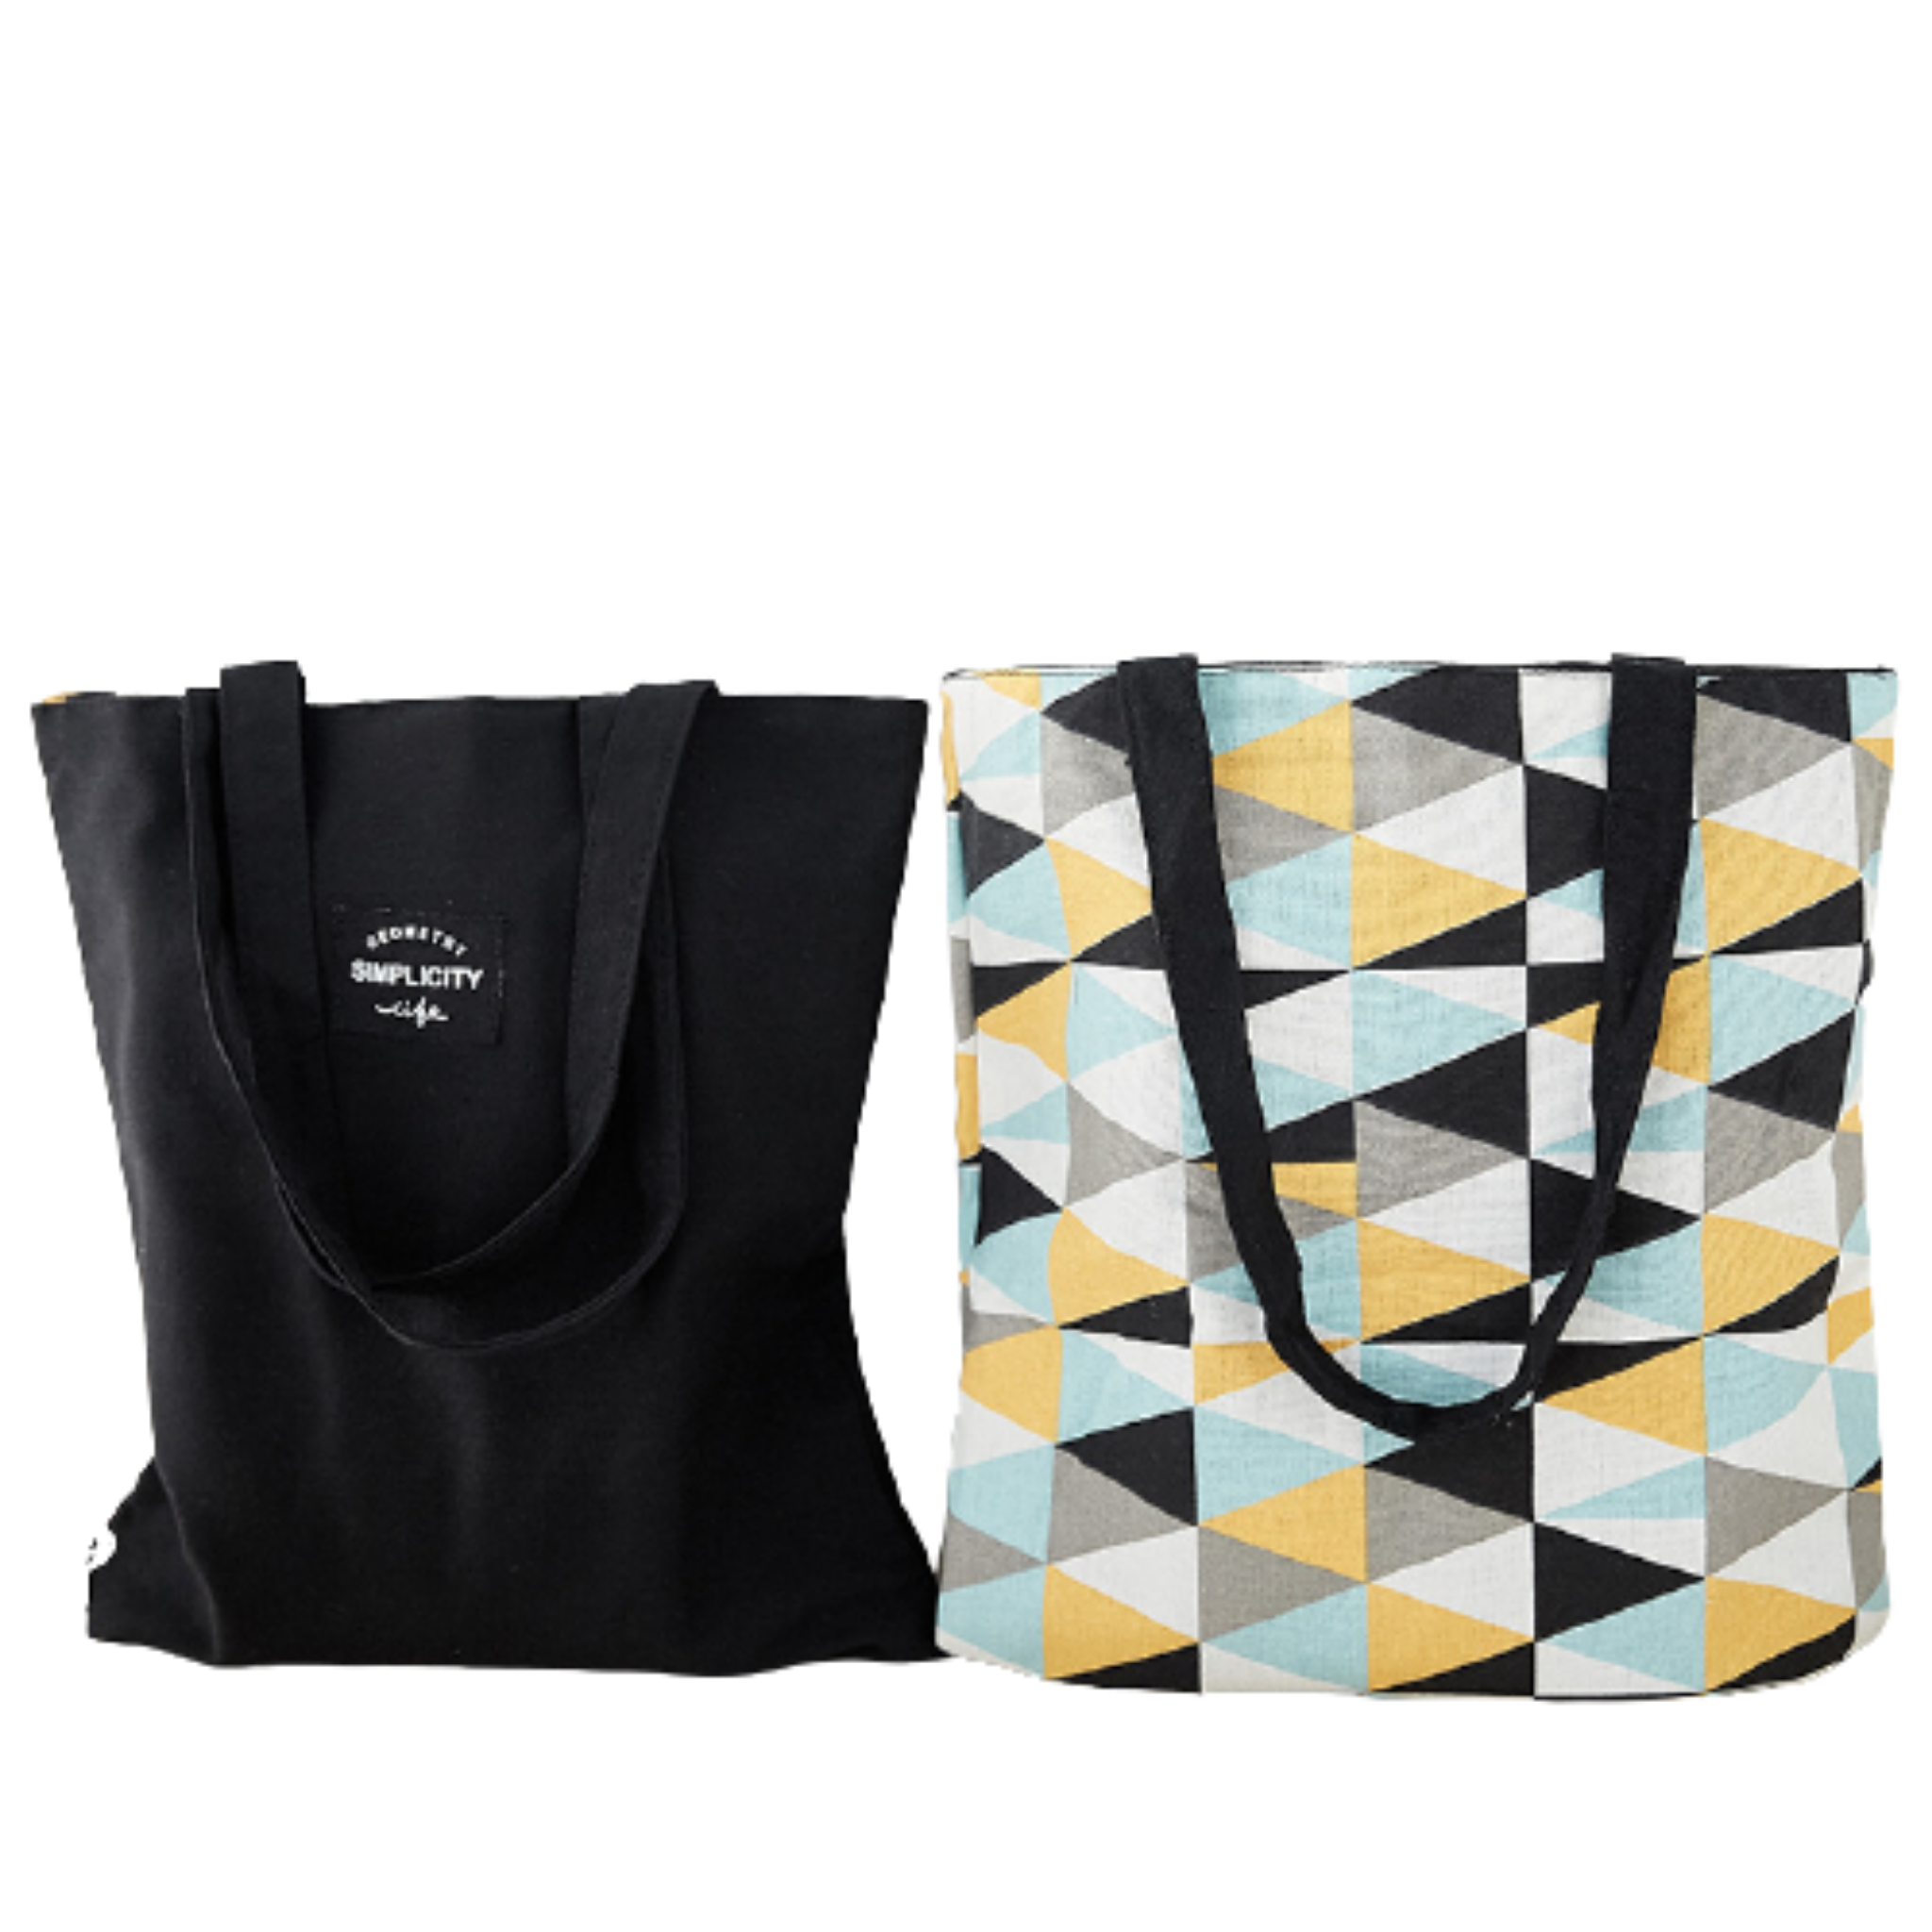 Reversible Tote Bags - Wet Nose Buddy